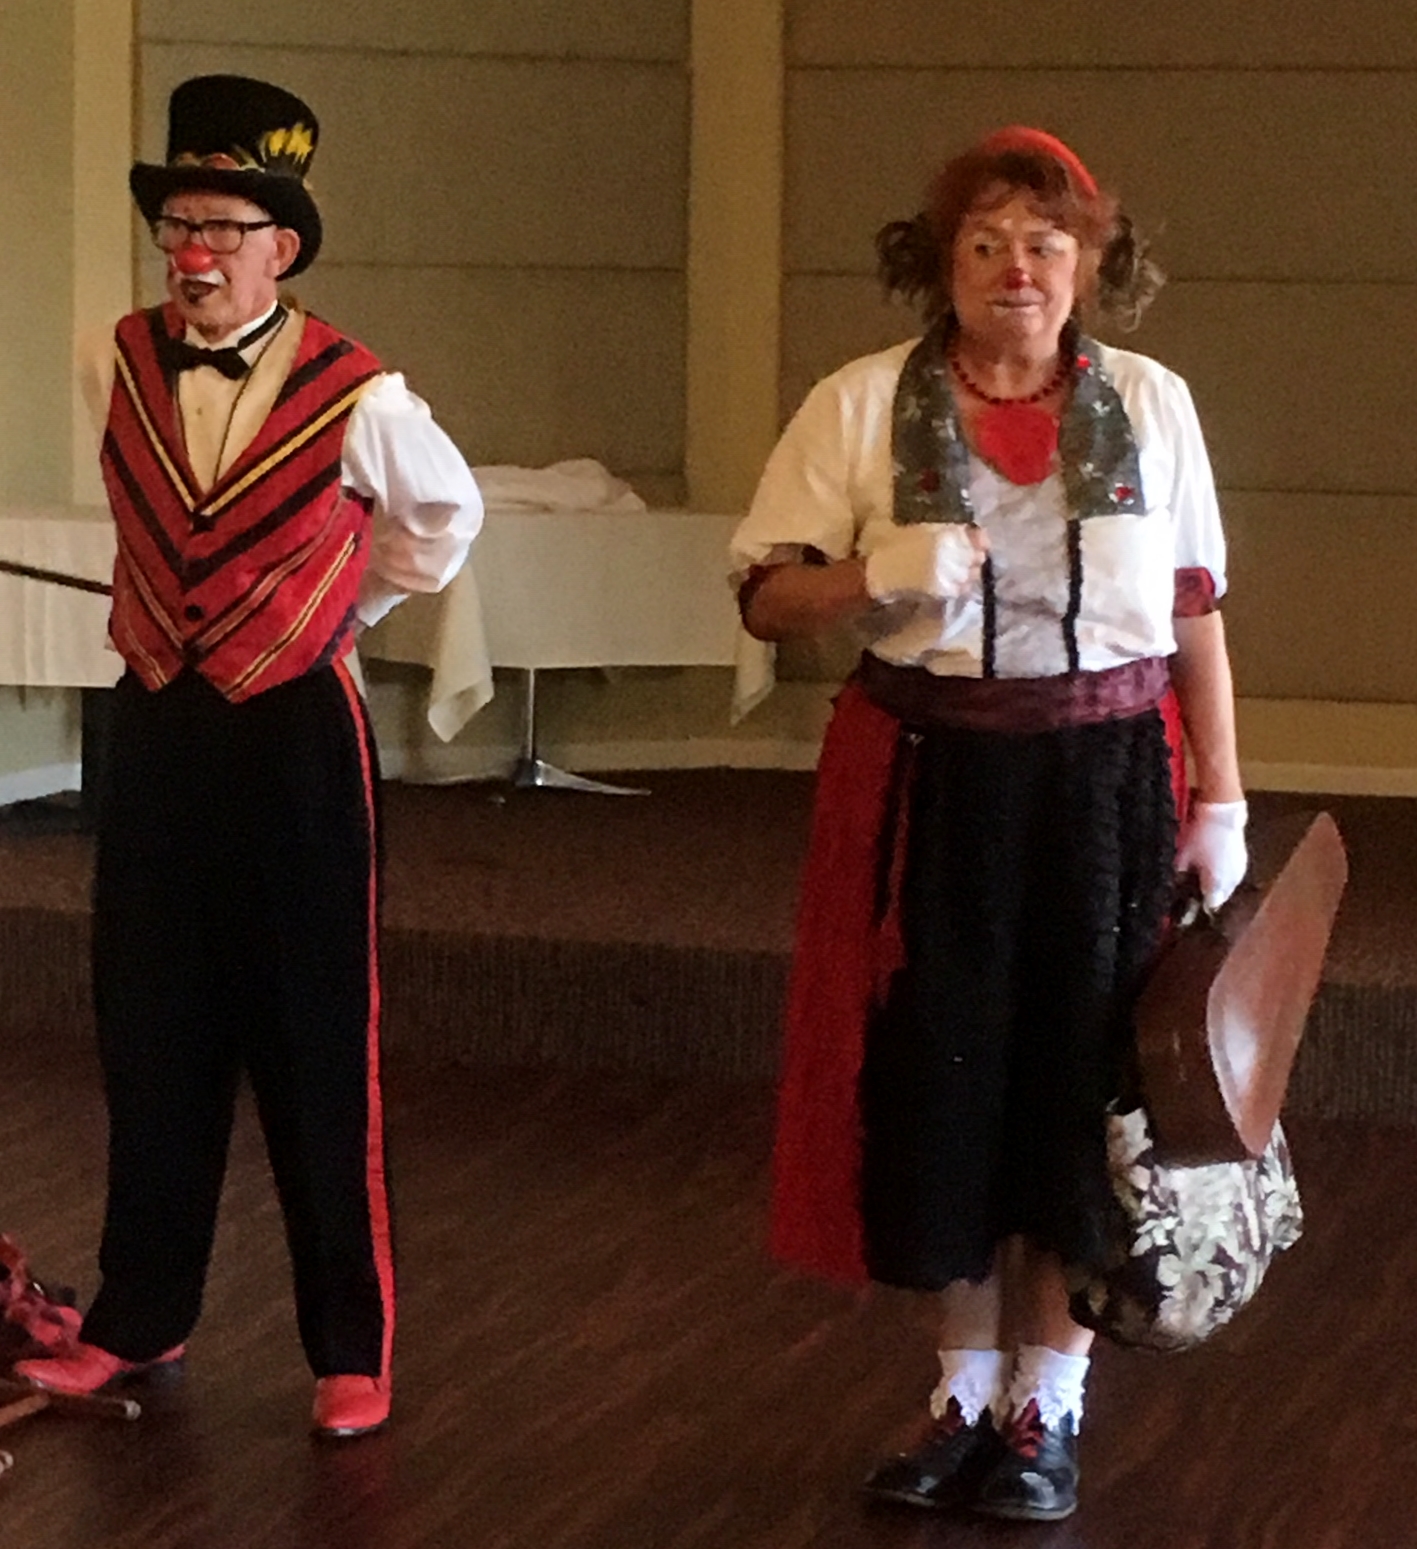 Robin Eurich and Karen Bell from Circus Arts Conservatory Entertain at the Nov. Luncheon.